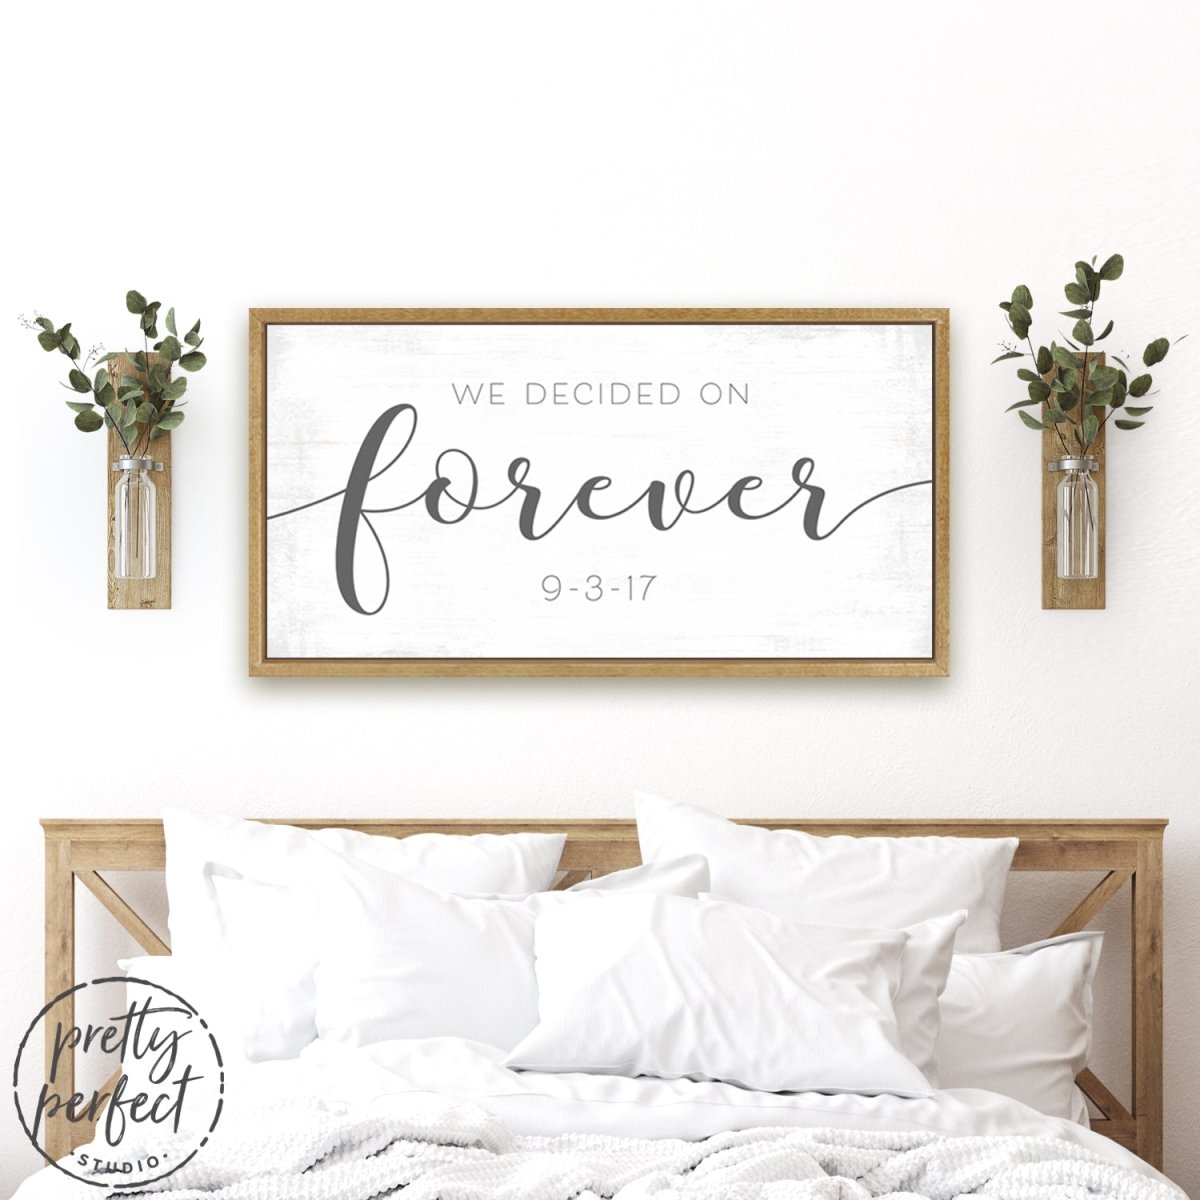 We Decided On Forever Wedding Date Sign Above Bed in Bedroom - Pretty Perfect Studio